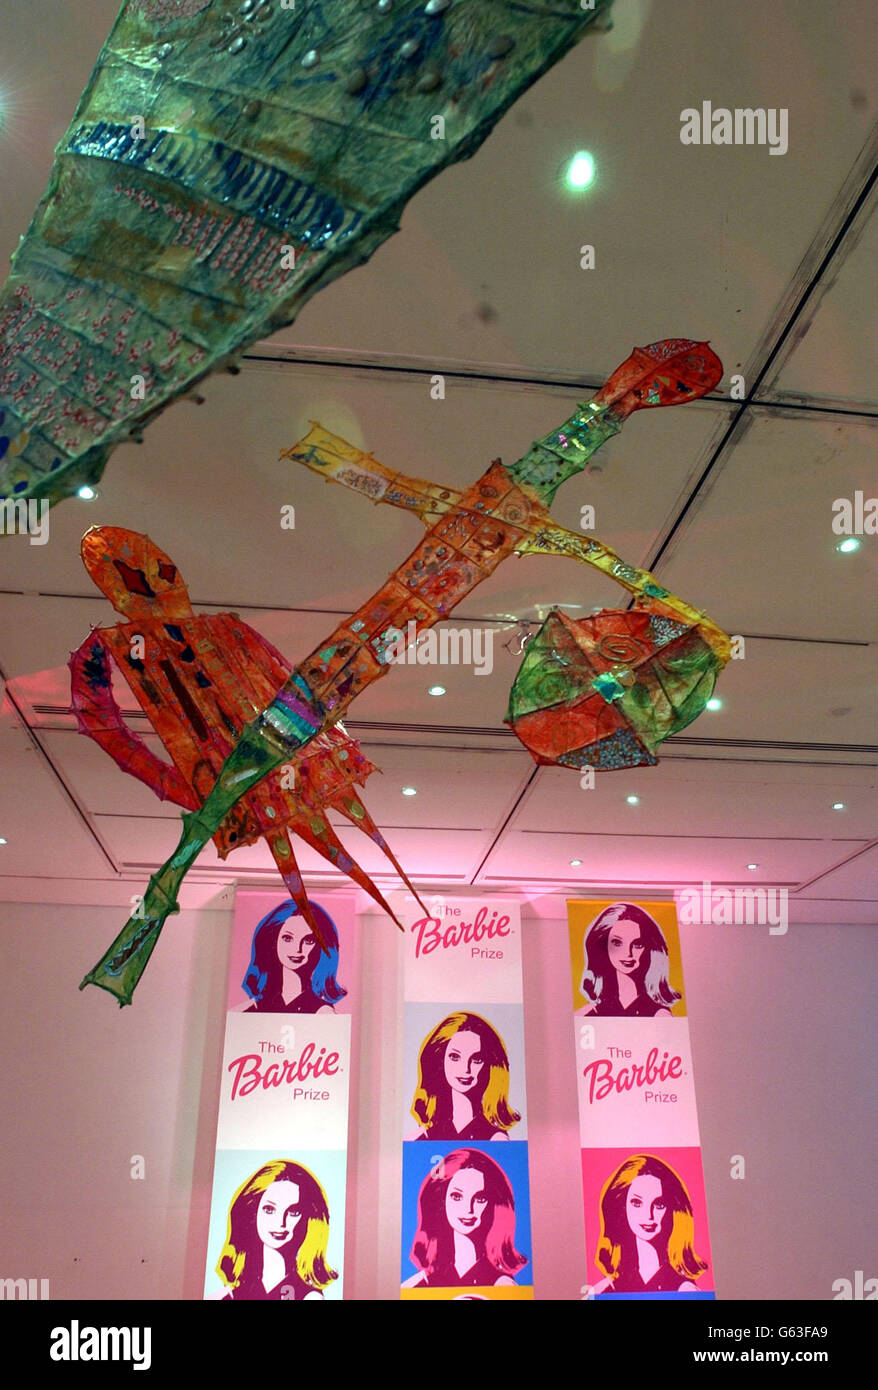 Kites made by children from Tarvin Primary School in Cheshire on show during The Barbie Prize shortlisted exhibition at the Royal College of Art, London. Five schools are on the shortlist for the winning prize of 20,000. Stock Photo